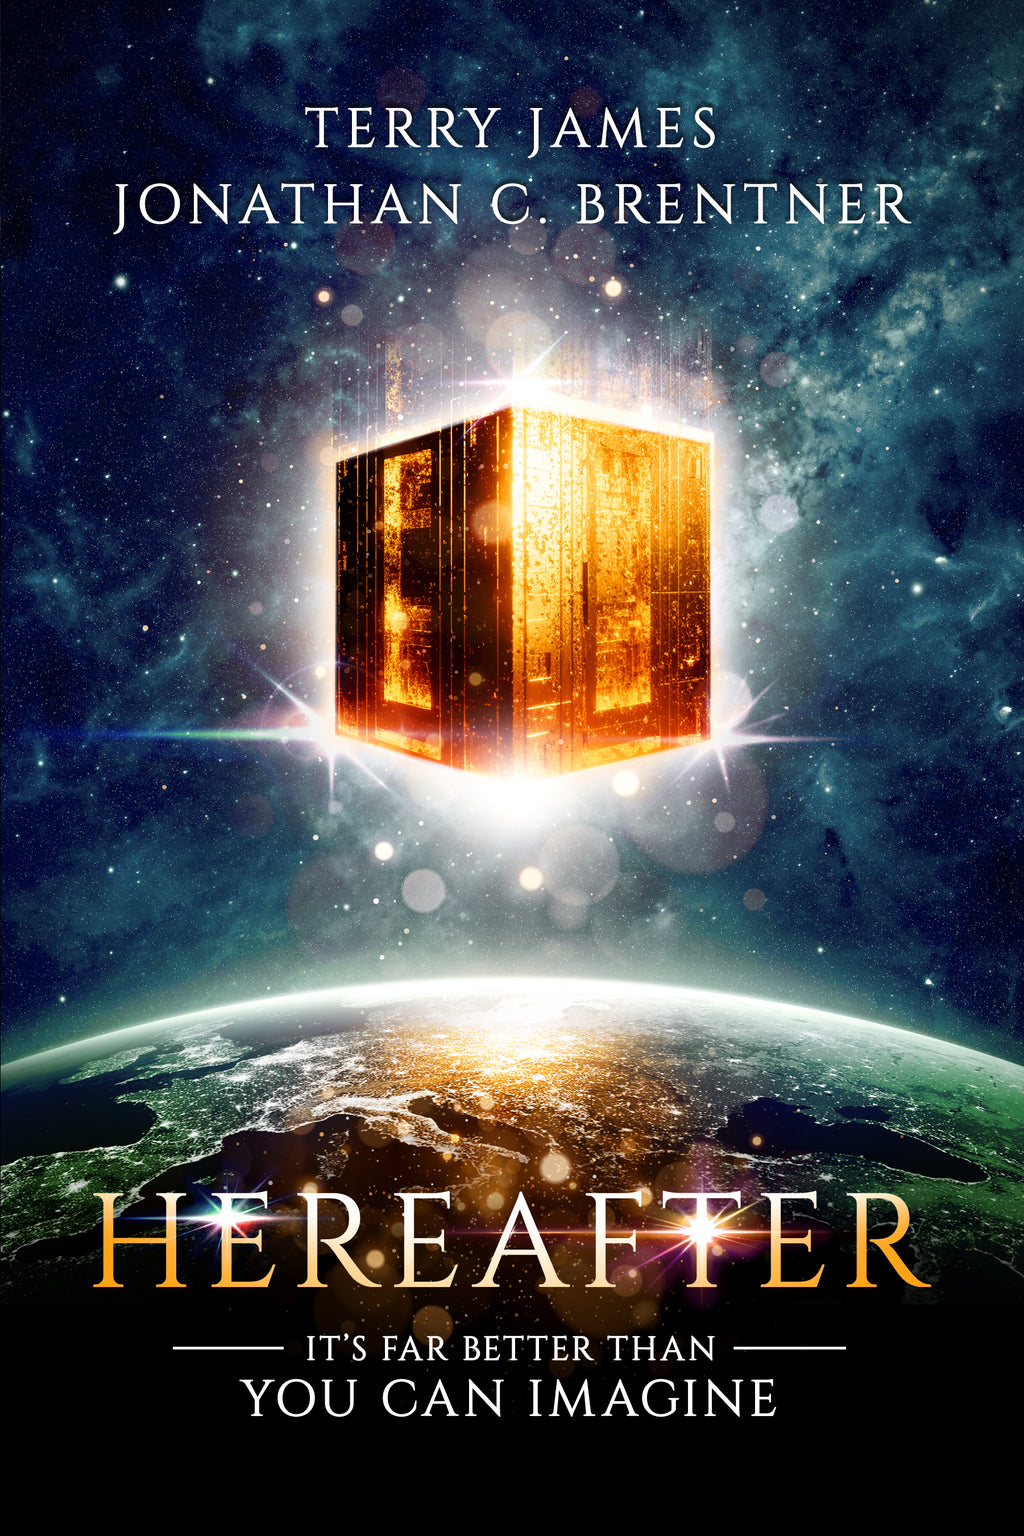 Hereafter: It’s Far Better Than You Can Imagine